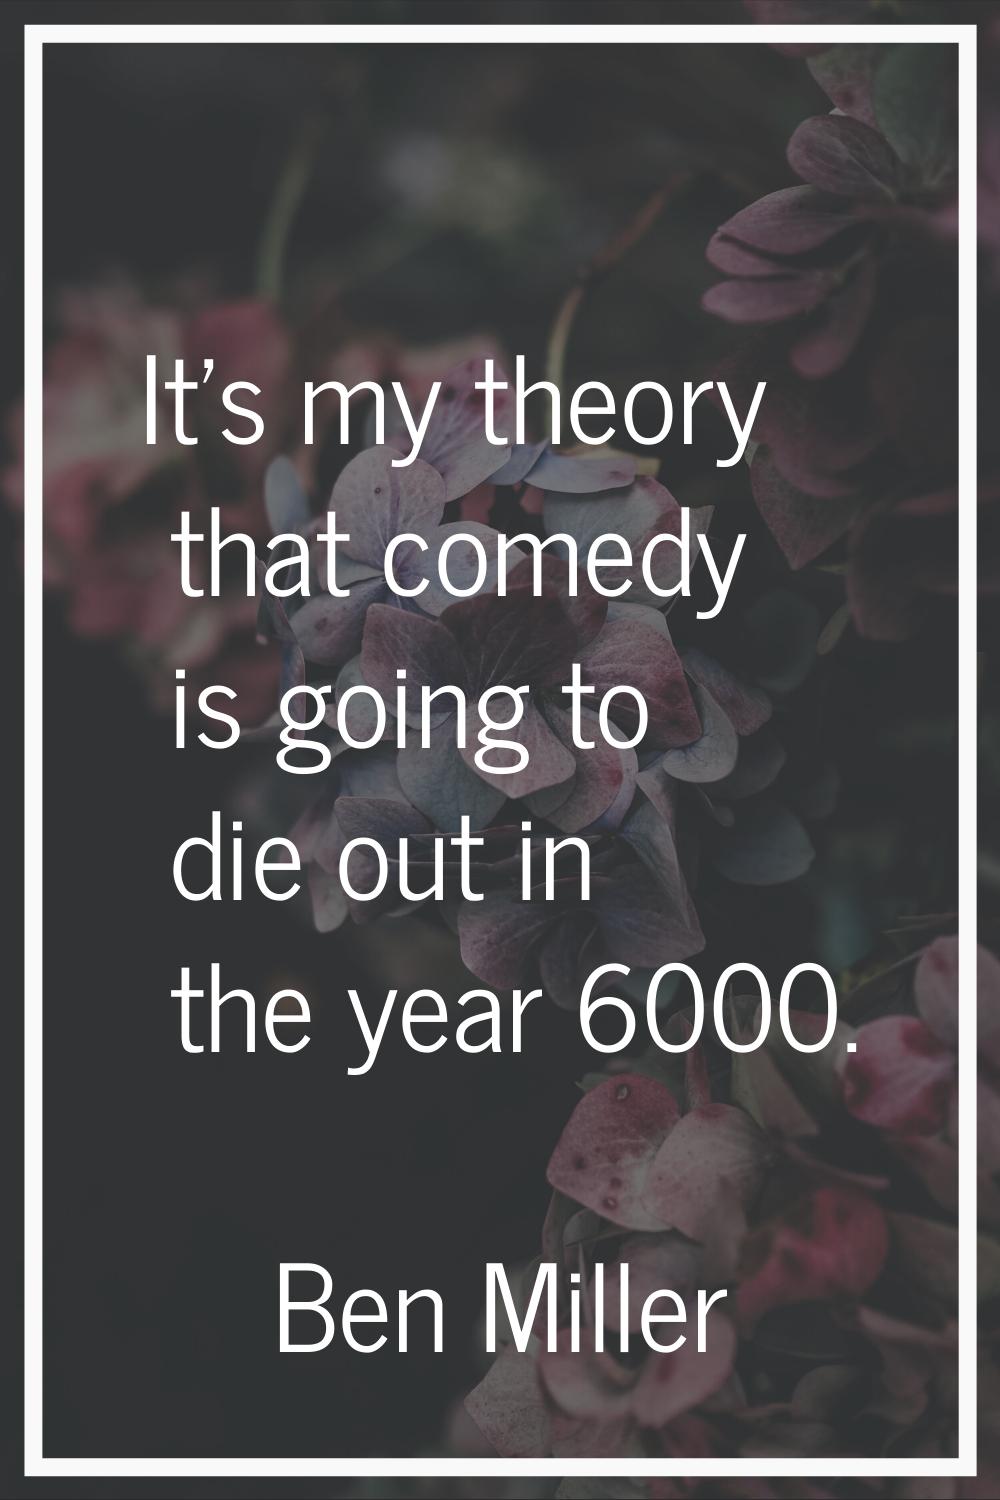 It's my theory that comedy is going to die out in the year 6000.